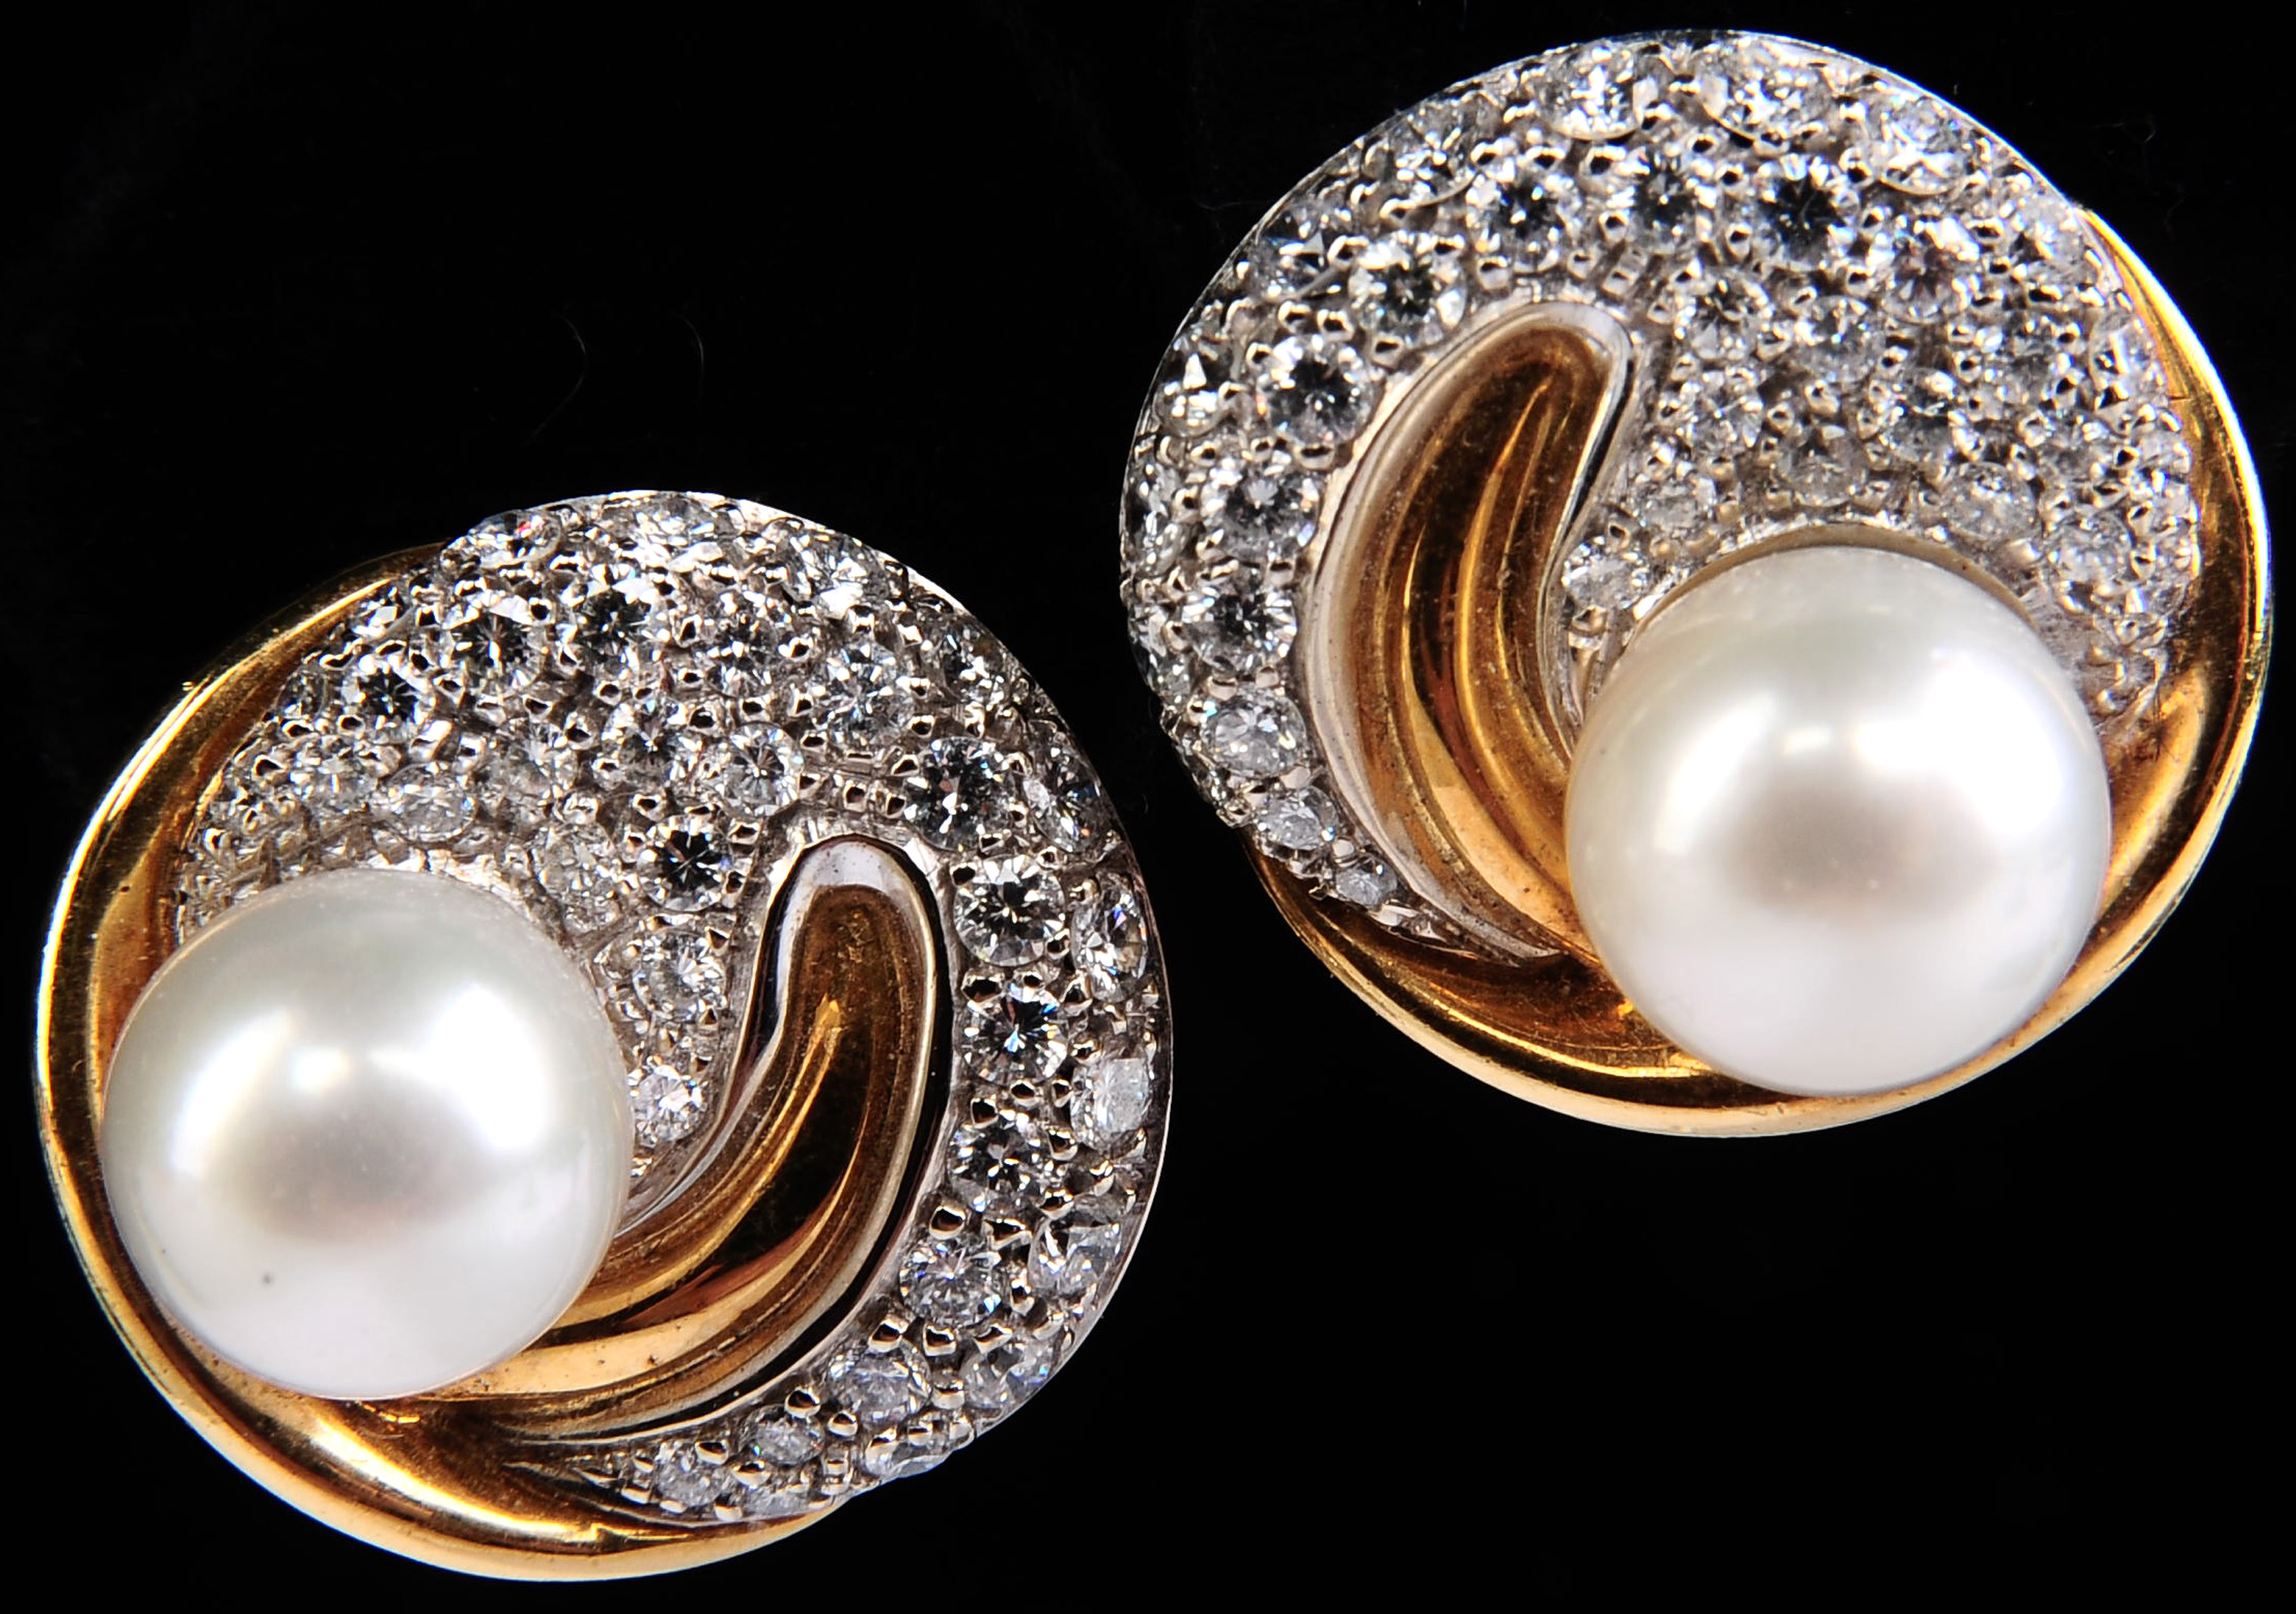 A PAIR OF 18K YELLOW GOLD PEARL AND DIAMOND EARRIN